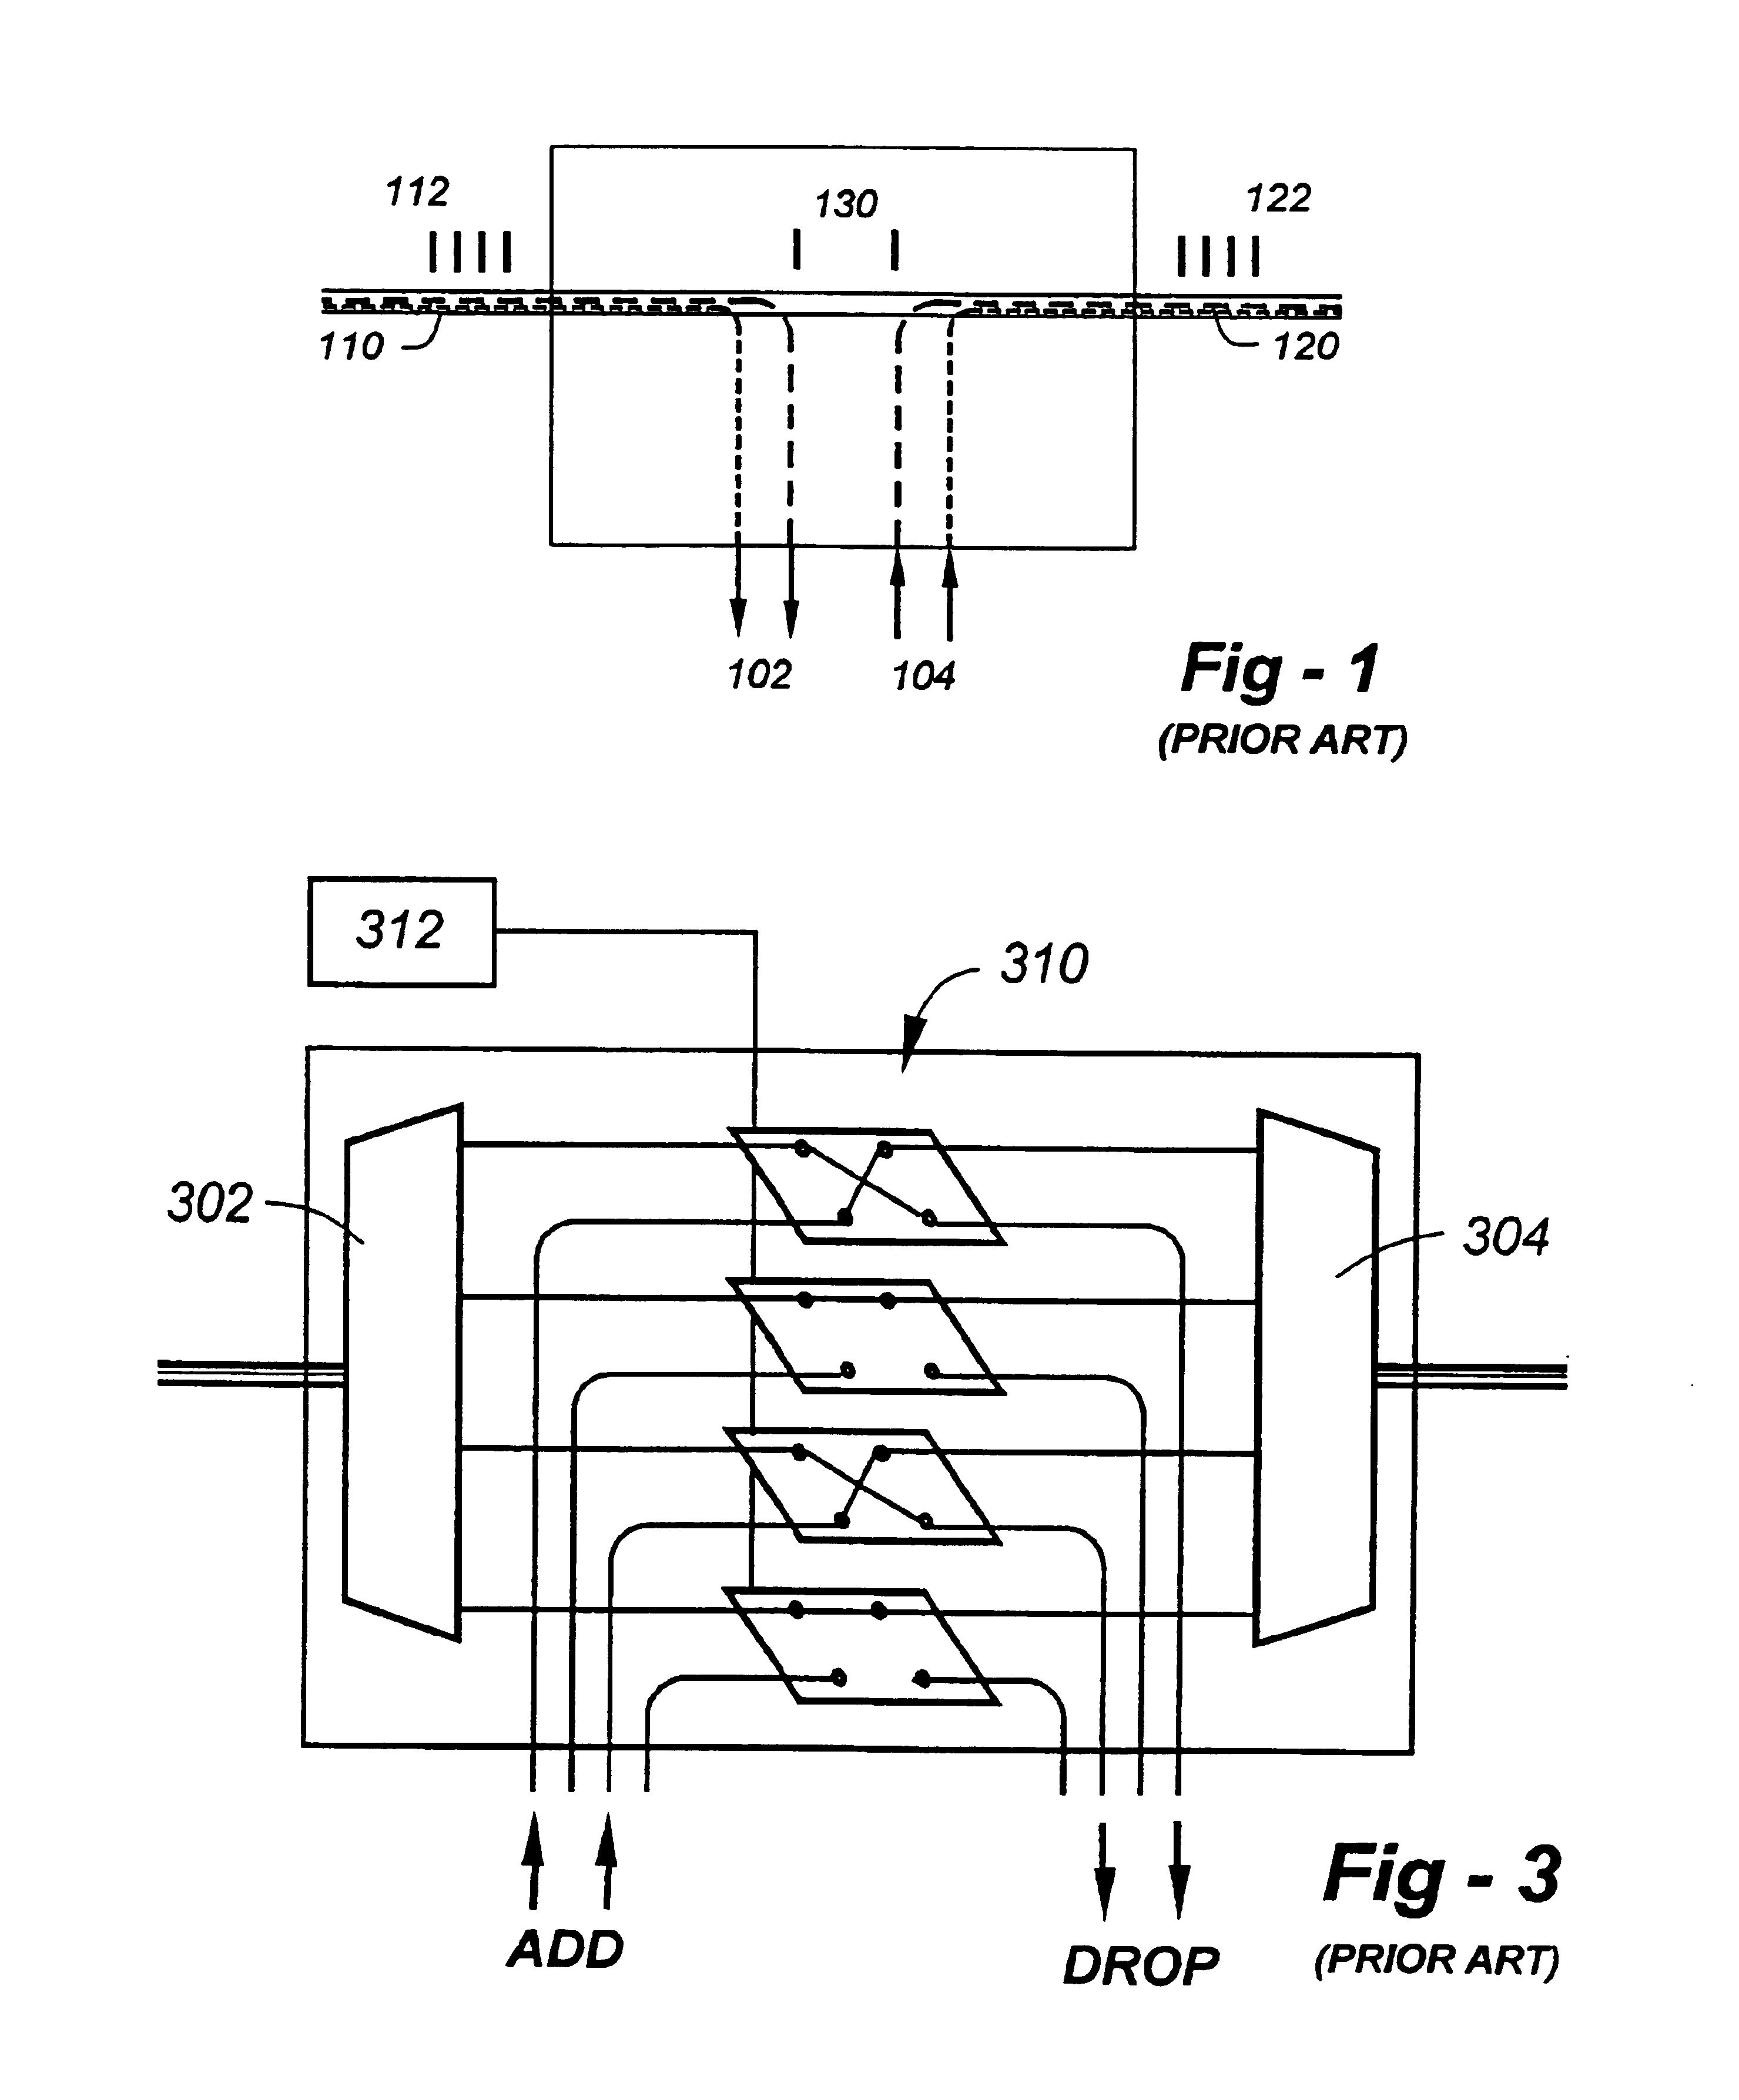 Configurable wavelength routing device